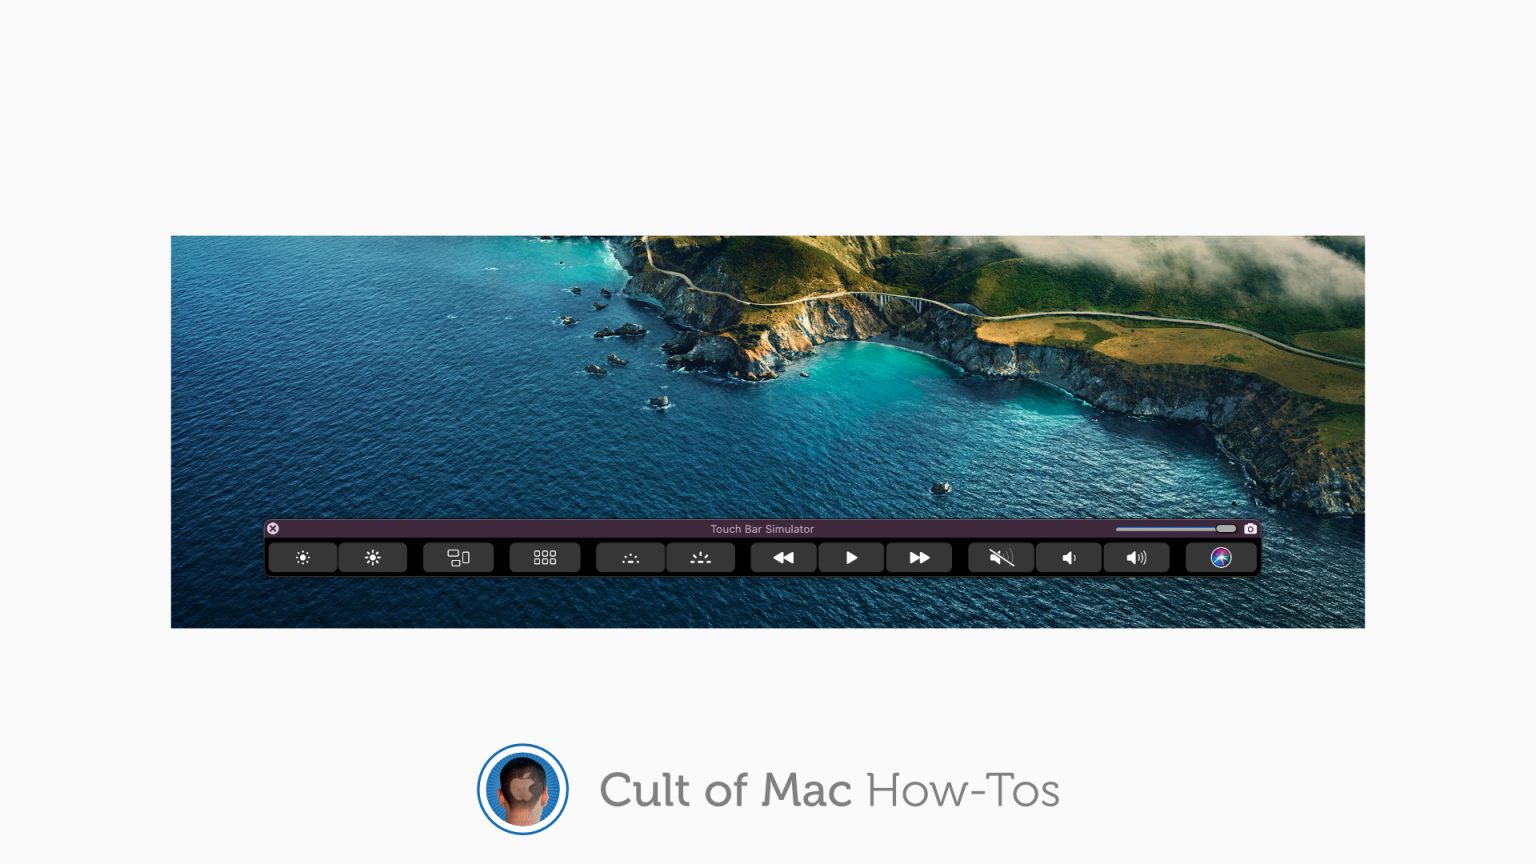 How to use Touch Bar on any Mac